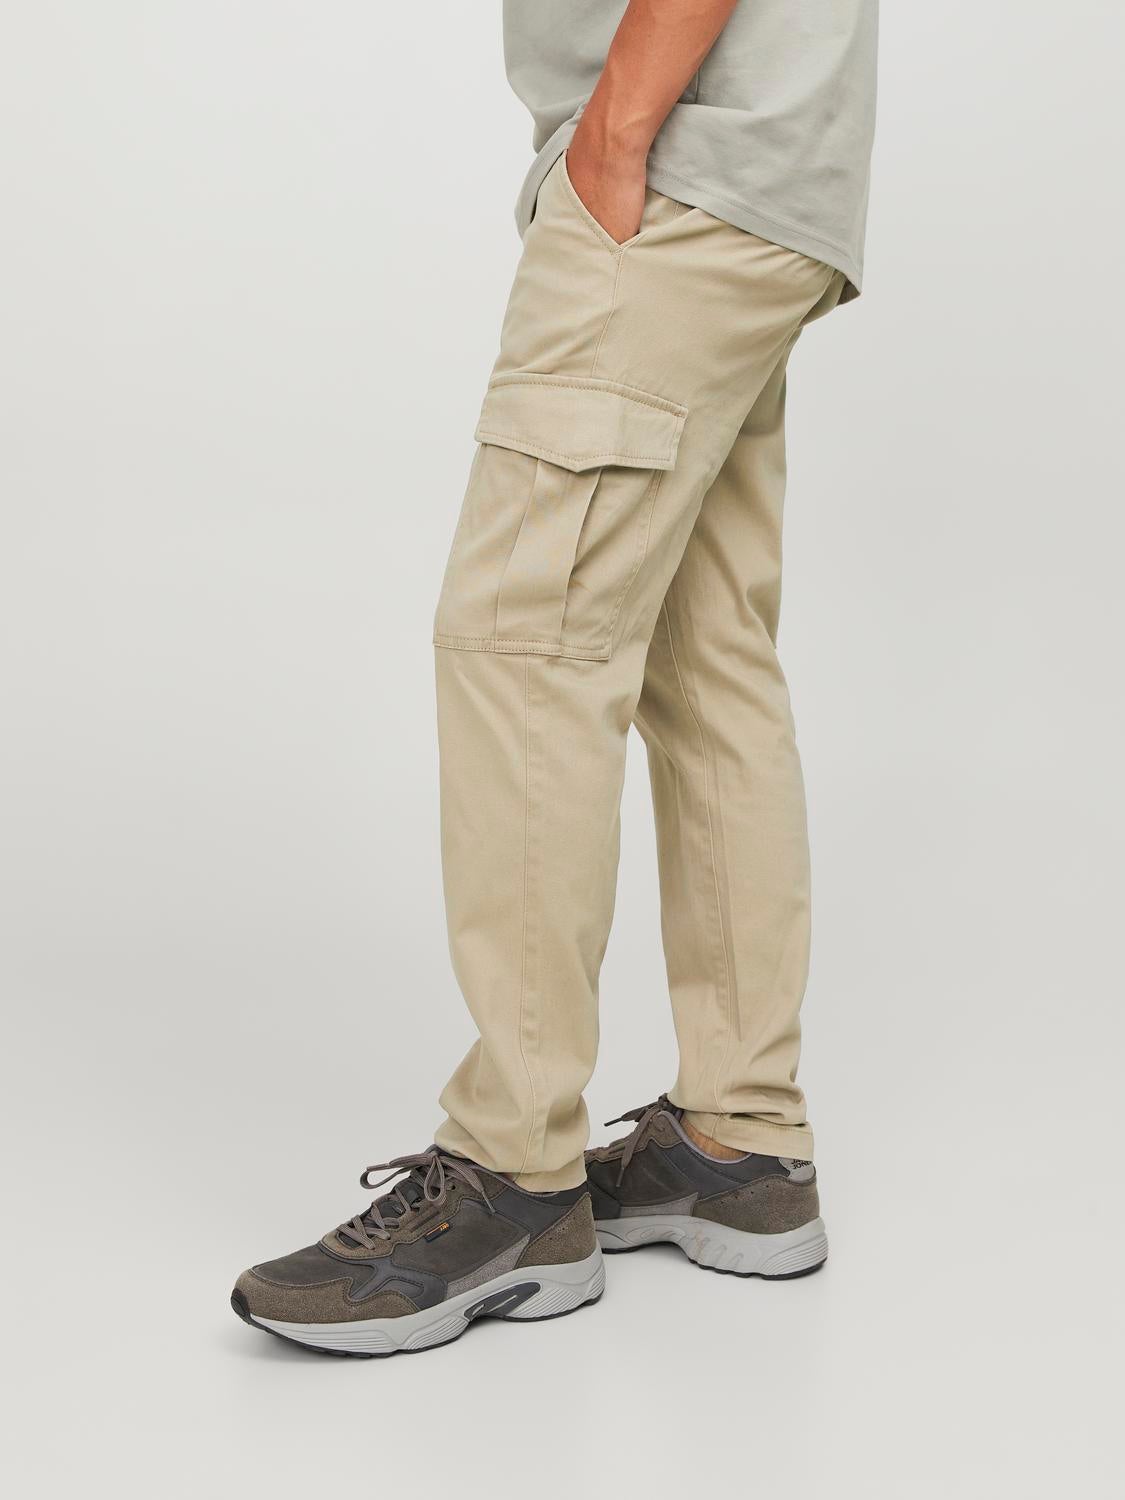 Buy Dennis Lingo Solid Cotton Men's Casual Cargo Pant, Tapered Fit, Mid  Rise, Ankle Length, Multi-Pocket Drawstring Stretchable Cargos for Men,  Trousers Online In India At Discounted Prices